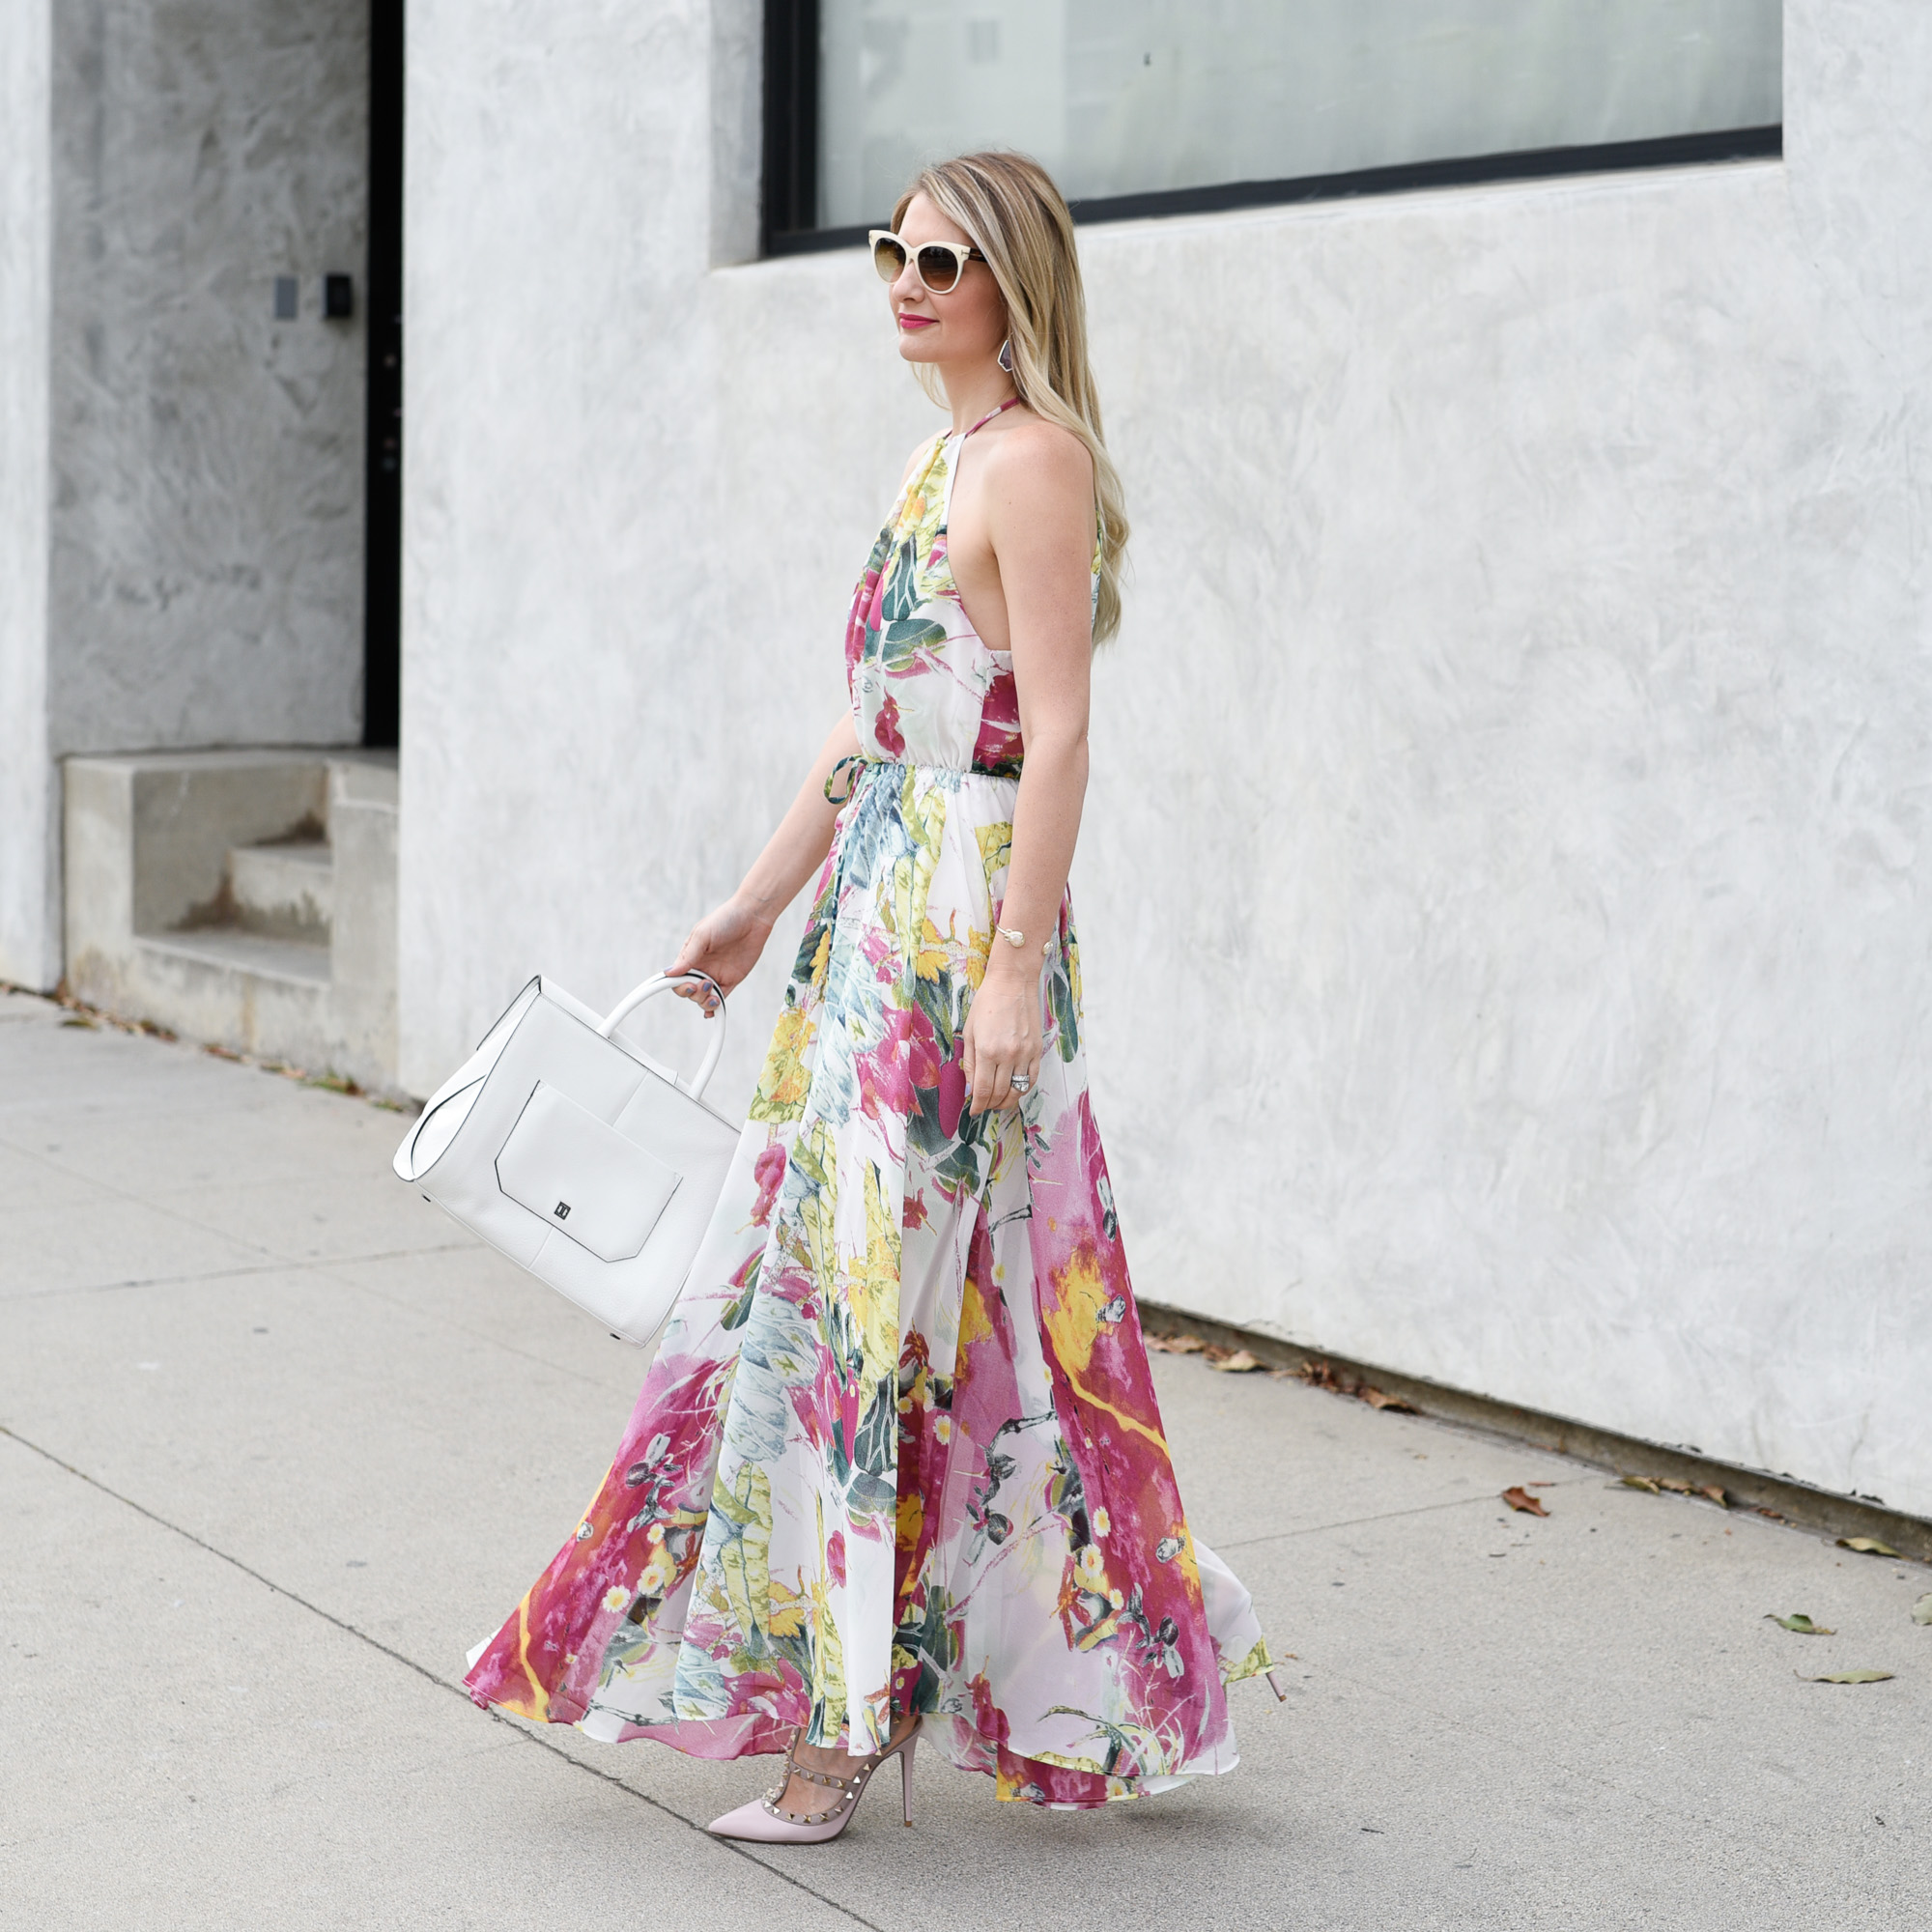 Twirling in an outfit that is the ideal wedding guest outfit